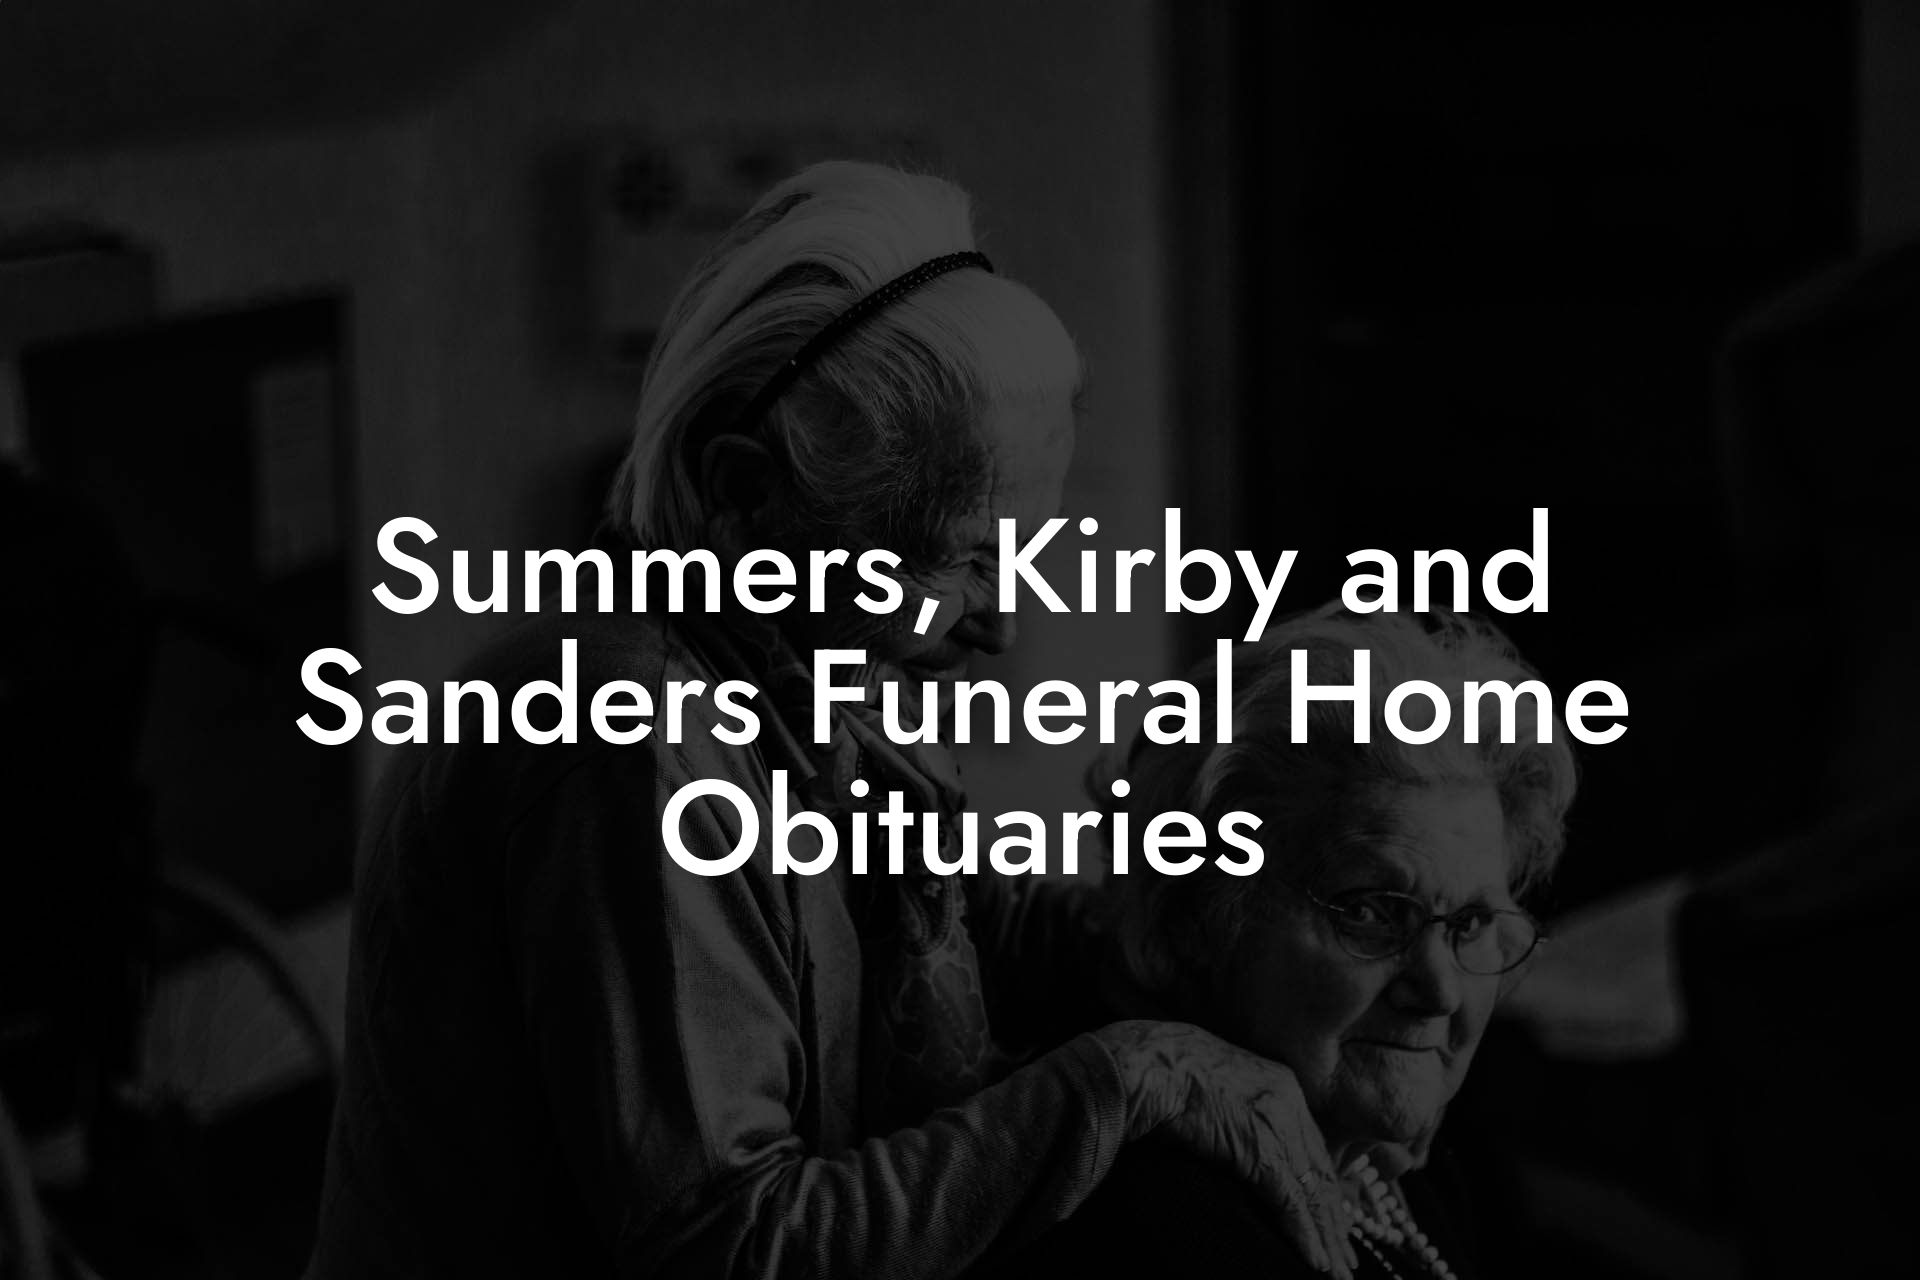 Summers, Kirby and Sanders Funeral Home Obituaries